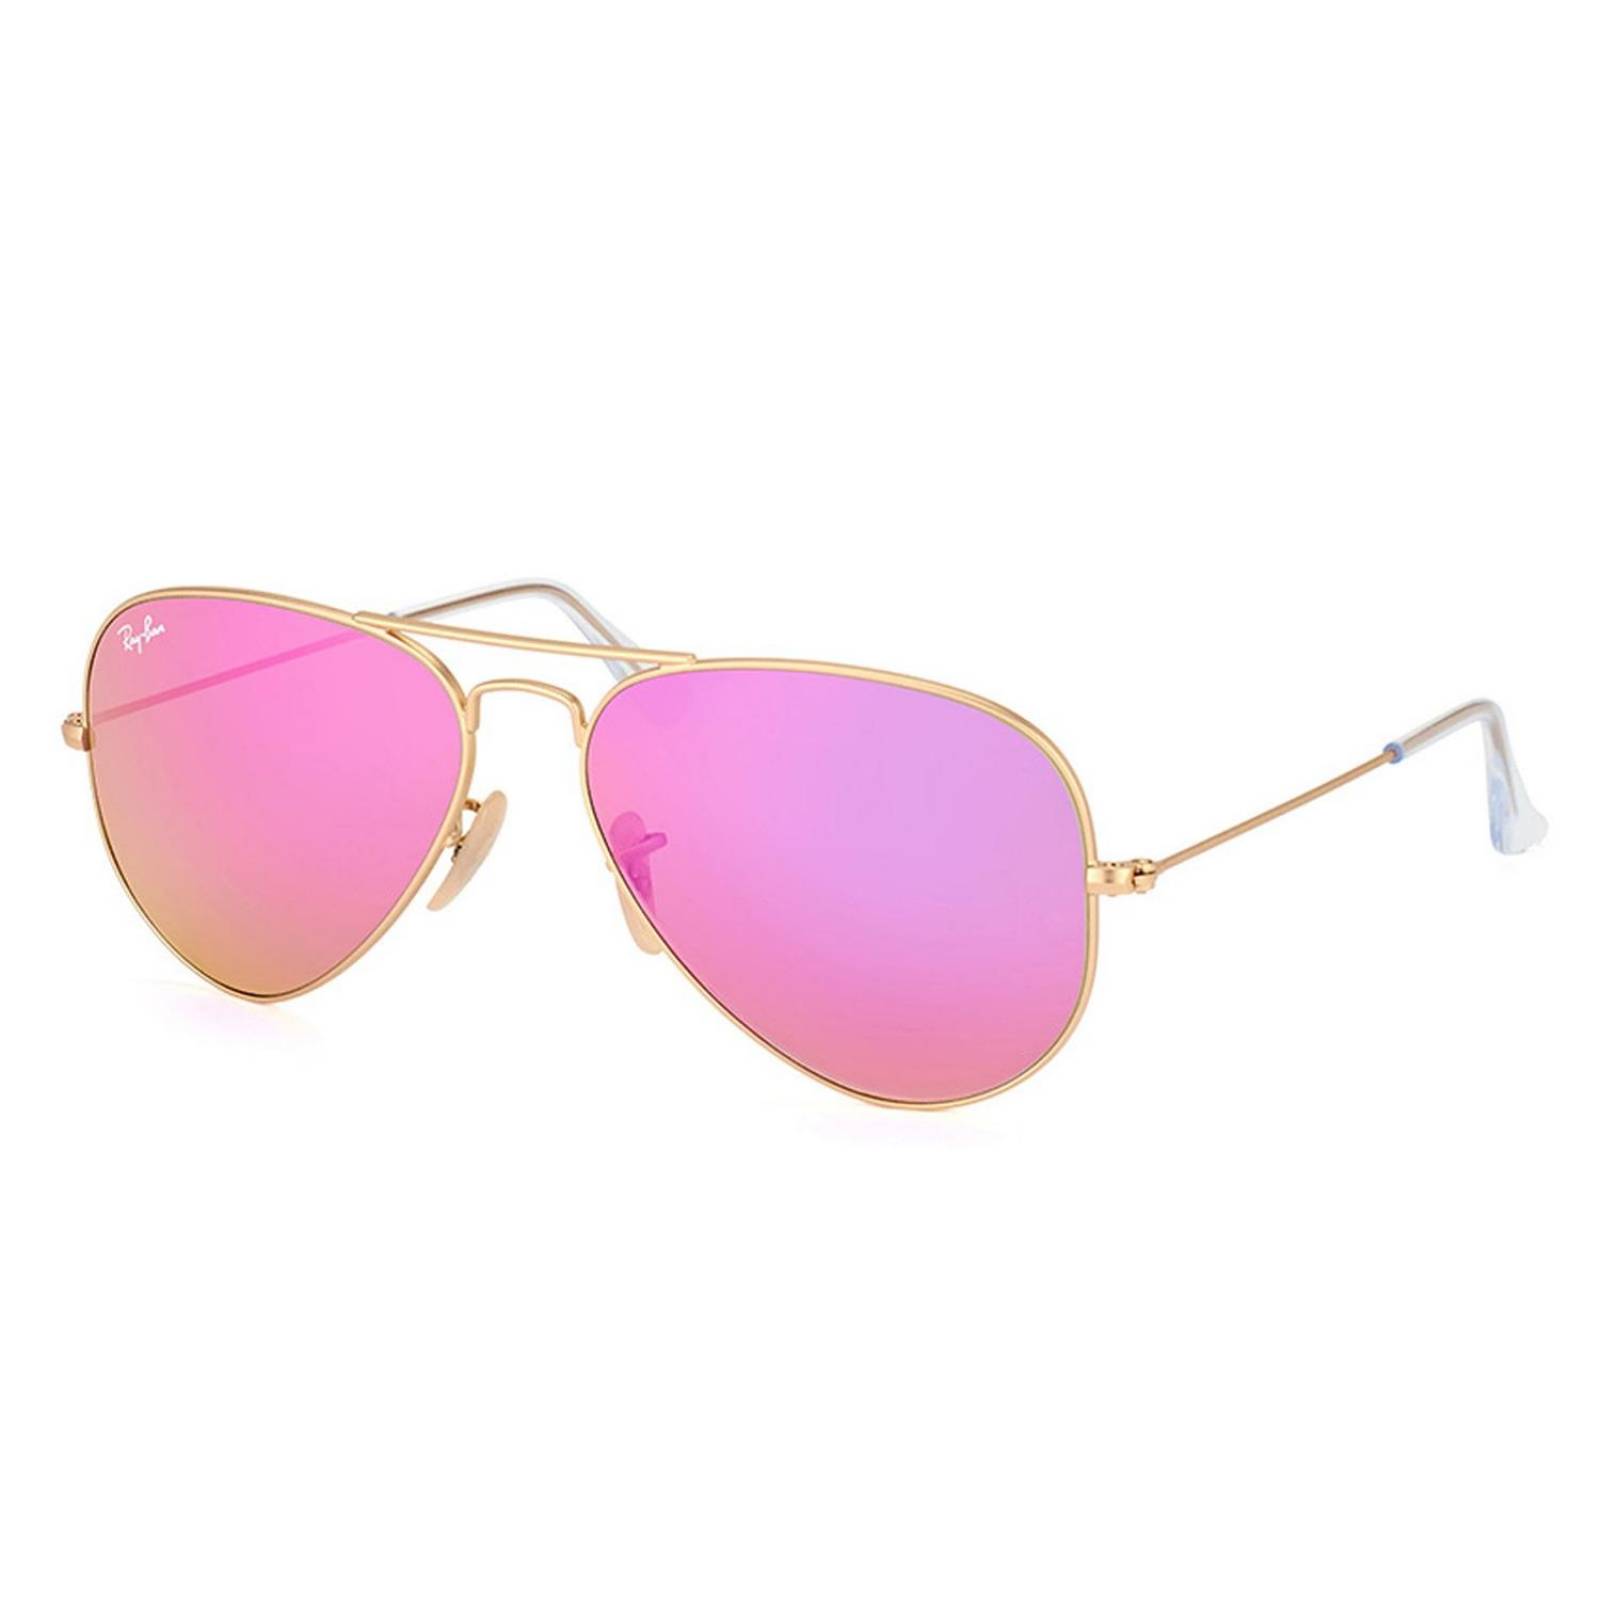 Lentes Ray-Ban RB 3025 112/4T 58 Aviator Gold / Pink Mirror 